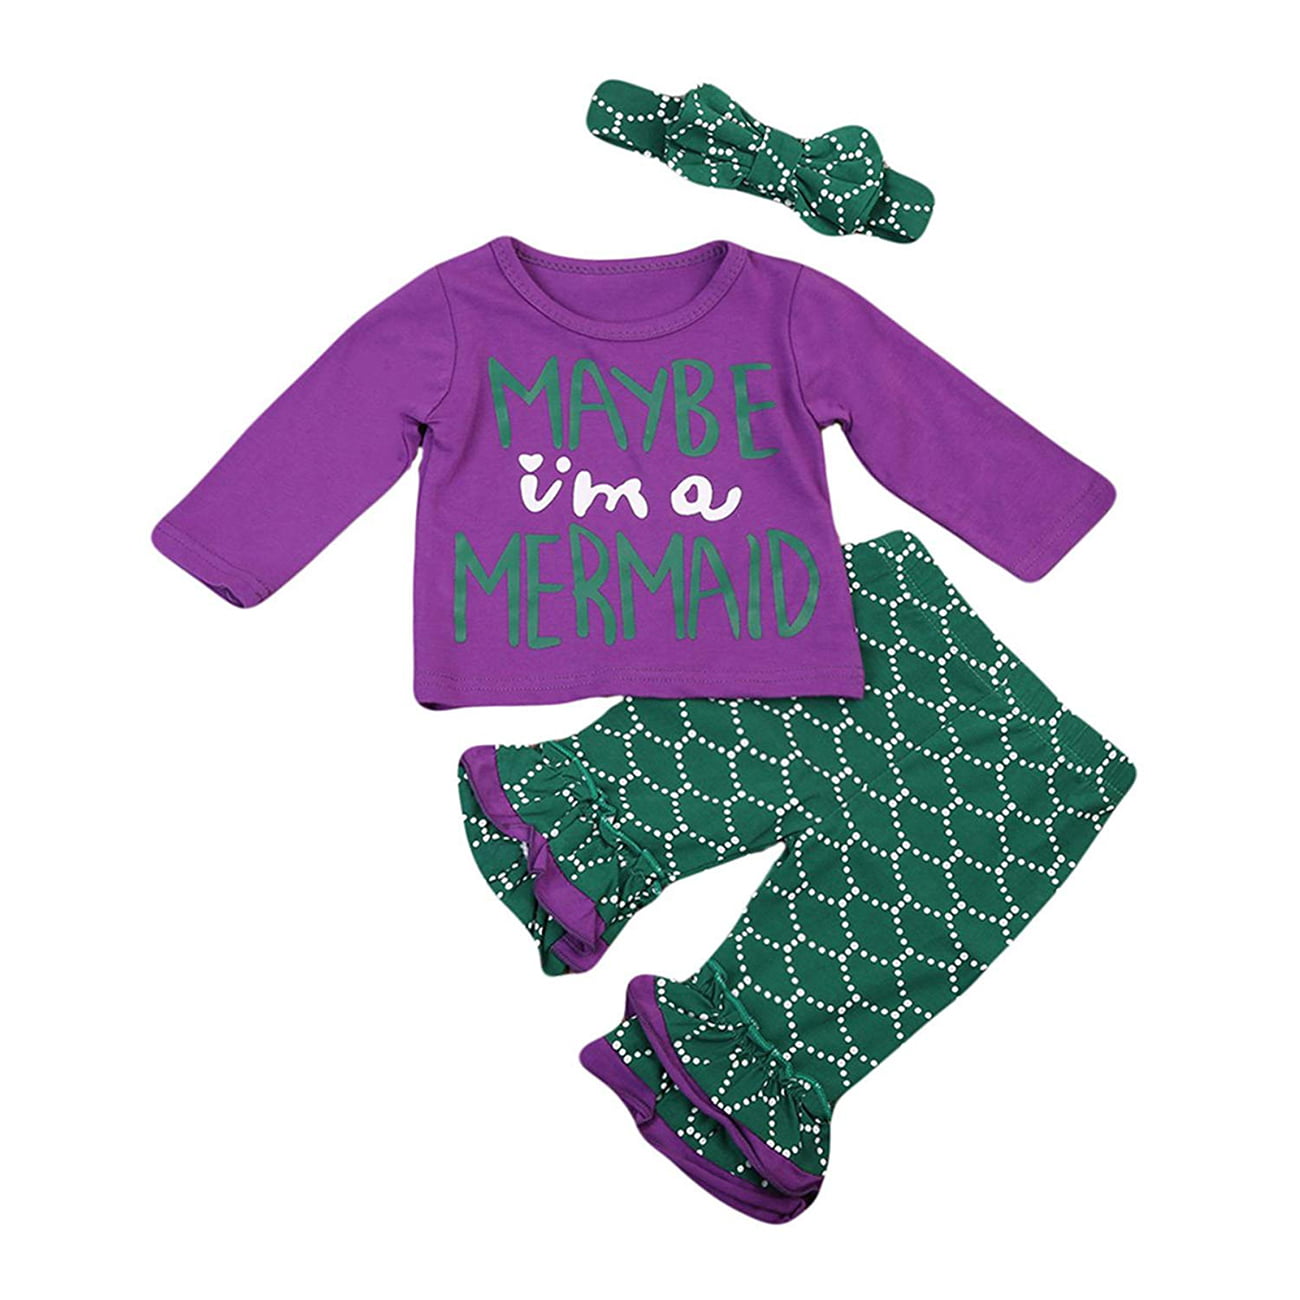 Baby Mermaid Outfit Toddler Girls Fish Scale Set 4PCS Letters Romper Top Mermaid Pants Matching Hat Headband Clothes Set 